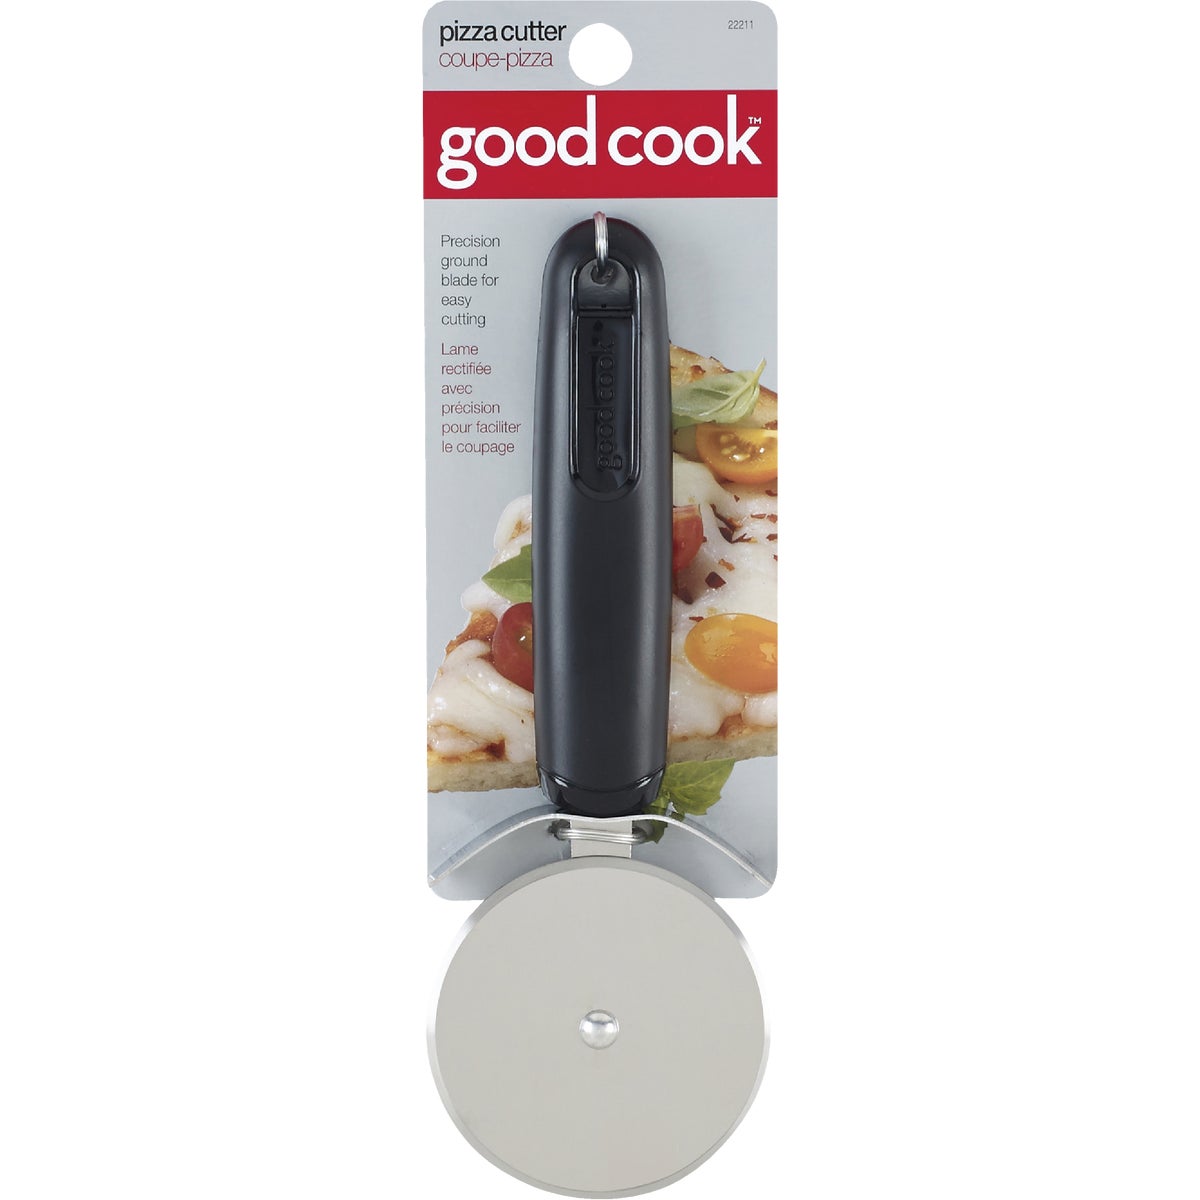 Item 620298, Stainless steel pizza cutter with black plastic handle.